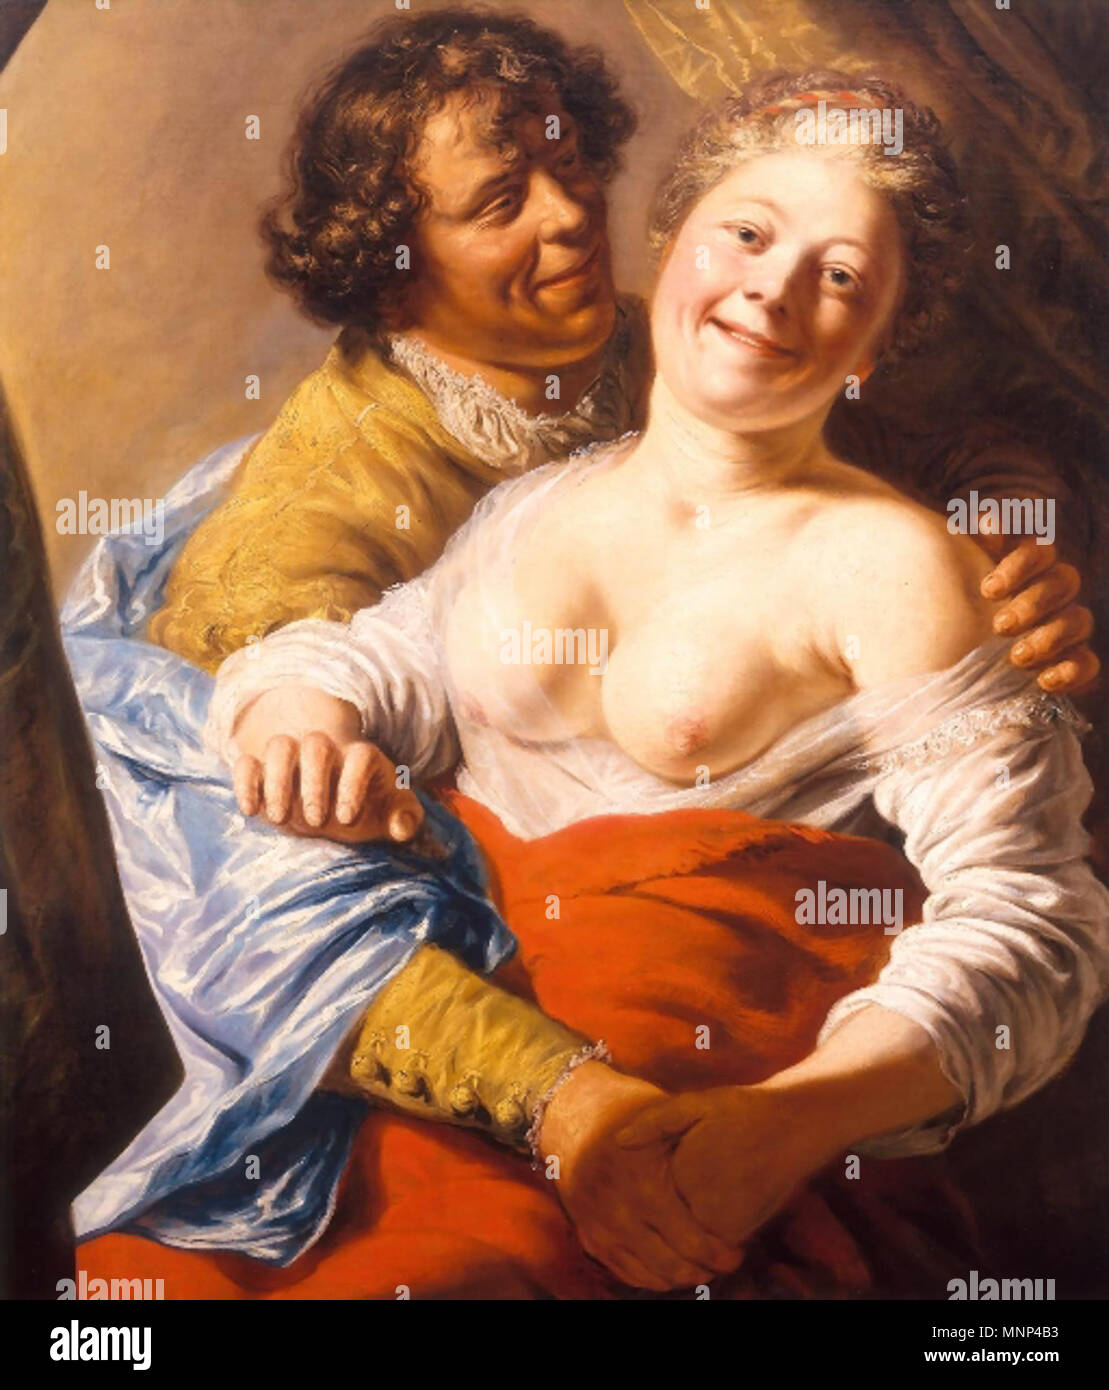 .  English: Youth Embracing a Young Woman . circa 1627-1628.    Jan Lievens  (1607–1674)     Alternative names Jan Lievensz., Jan Livens, Jan Lyvius, Jan Lyvyus  Description Dutch painter, draughtsman and ornamental painter  Date of birth/death 24 October 1607 8 June 1674 (buried)  Location of birth/death Leiden Amsterdam  Work location Leiden (1615-1617), Amsterdam (1617-1621), Leiden (1629-1631), London (1632-1634), Antwerp (1635-1644), Leiden (1629), Amsterdam (1644-1669), The Hague (1654-1658, 1670-1671), Leiden (1671-1672), Amsterdam (1672-1674)  Authority control  : Q430783 VIAF: 1012003 Stock Photo